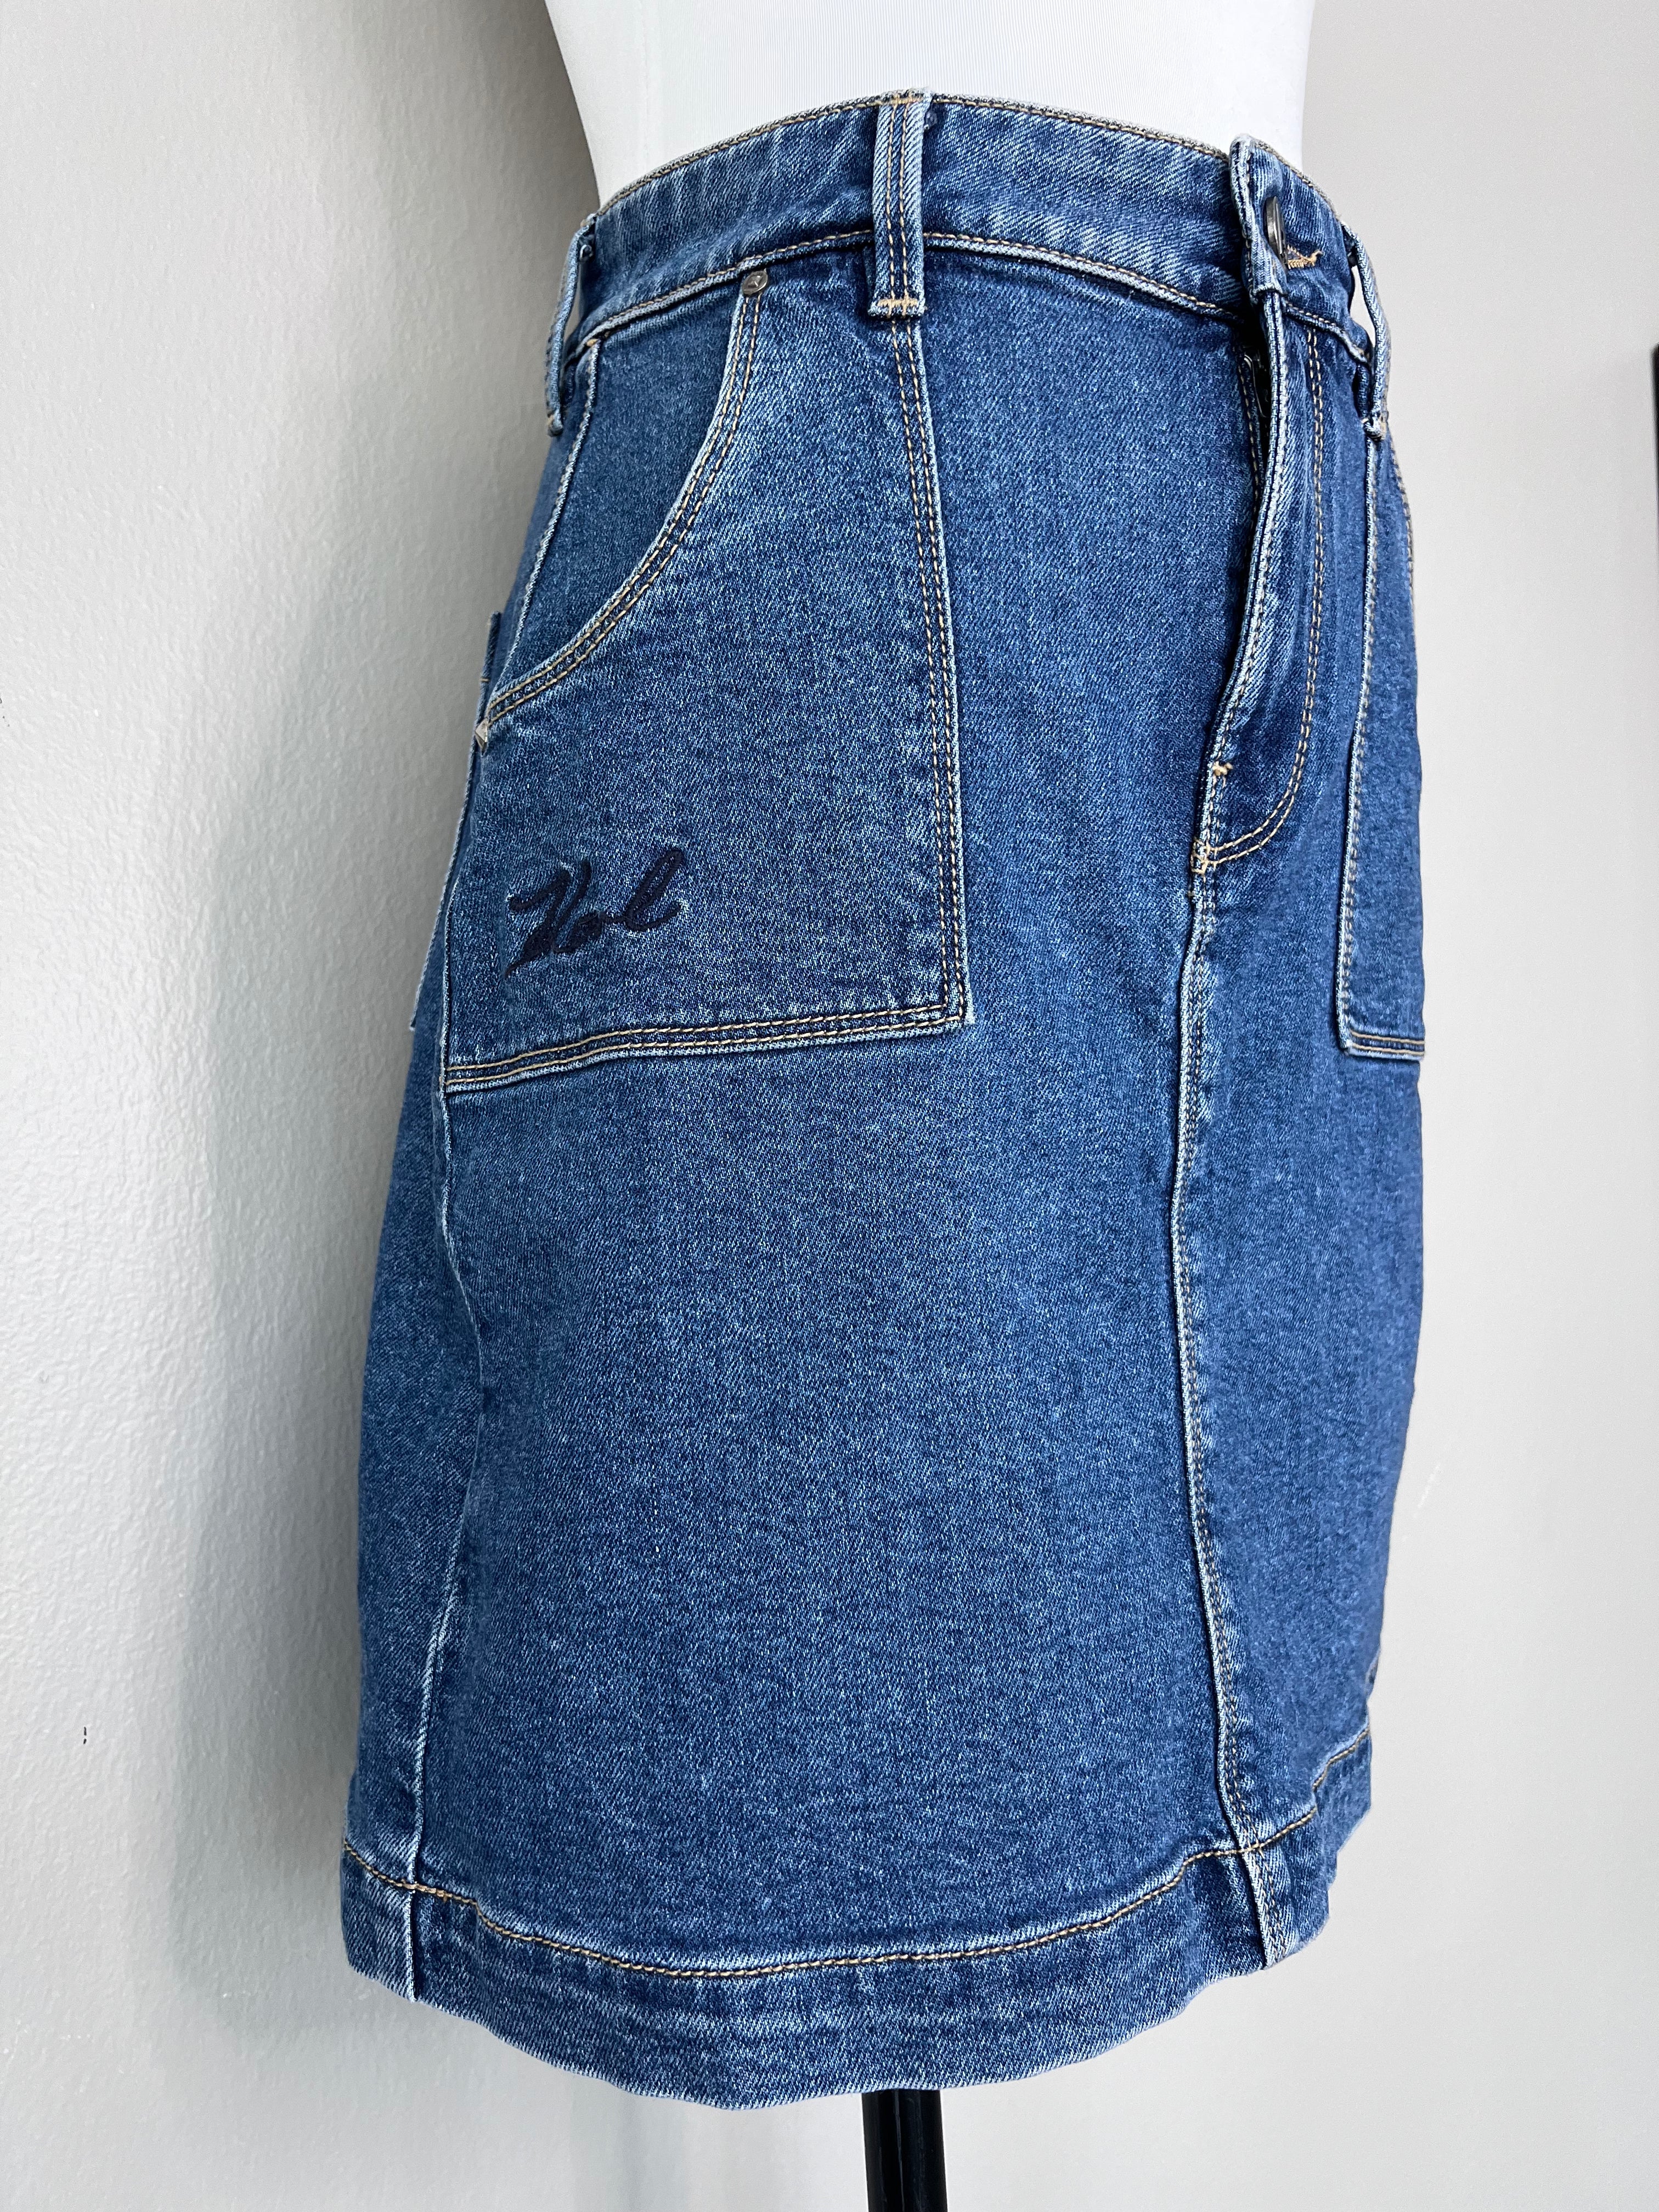 Blue short denim skirt with pockets on either side at the front and back, and brand logo at the back pocket.- KARL LAGERFELD DENIM